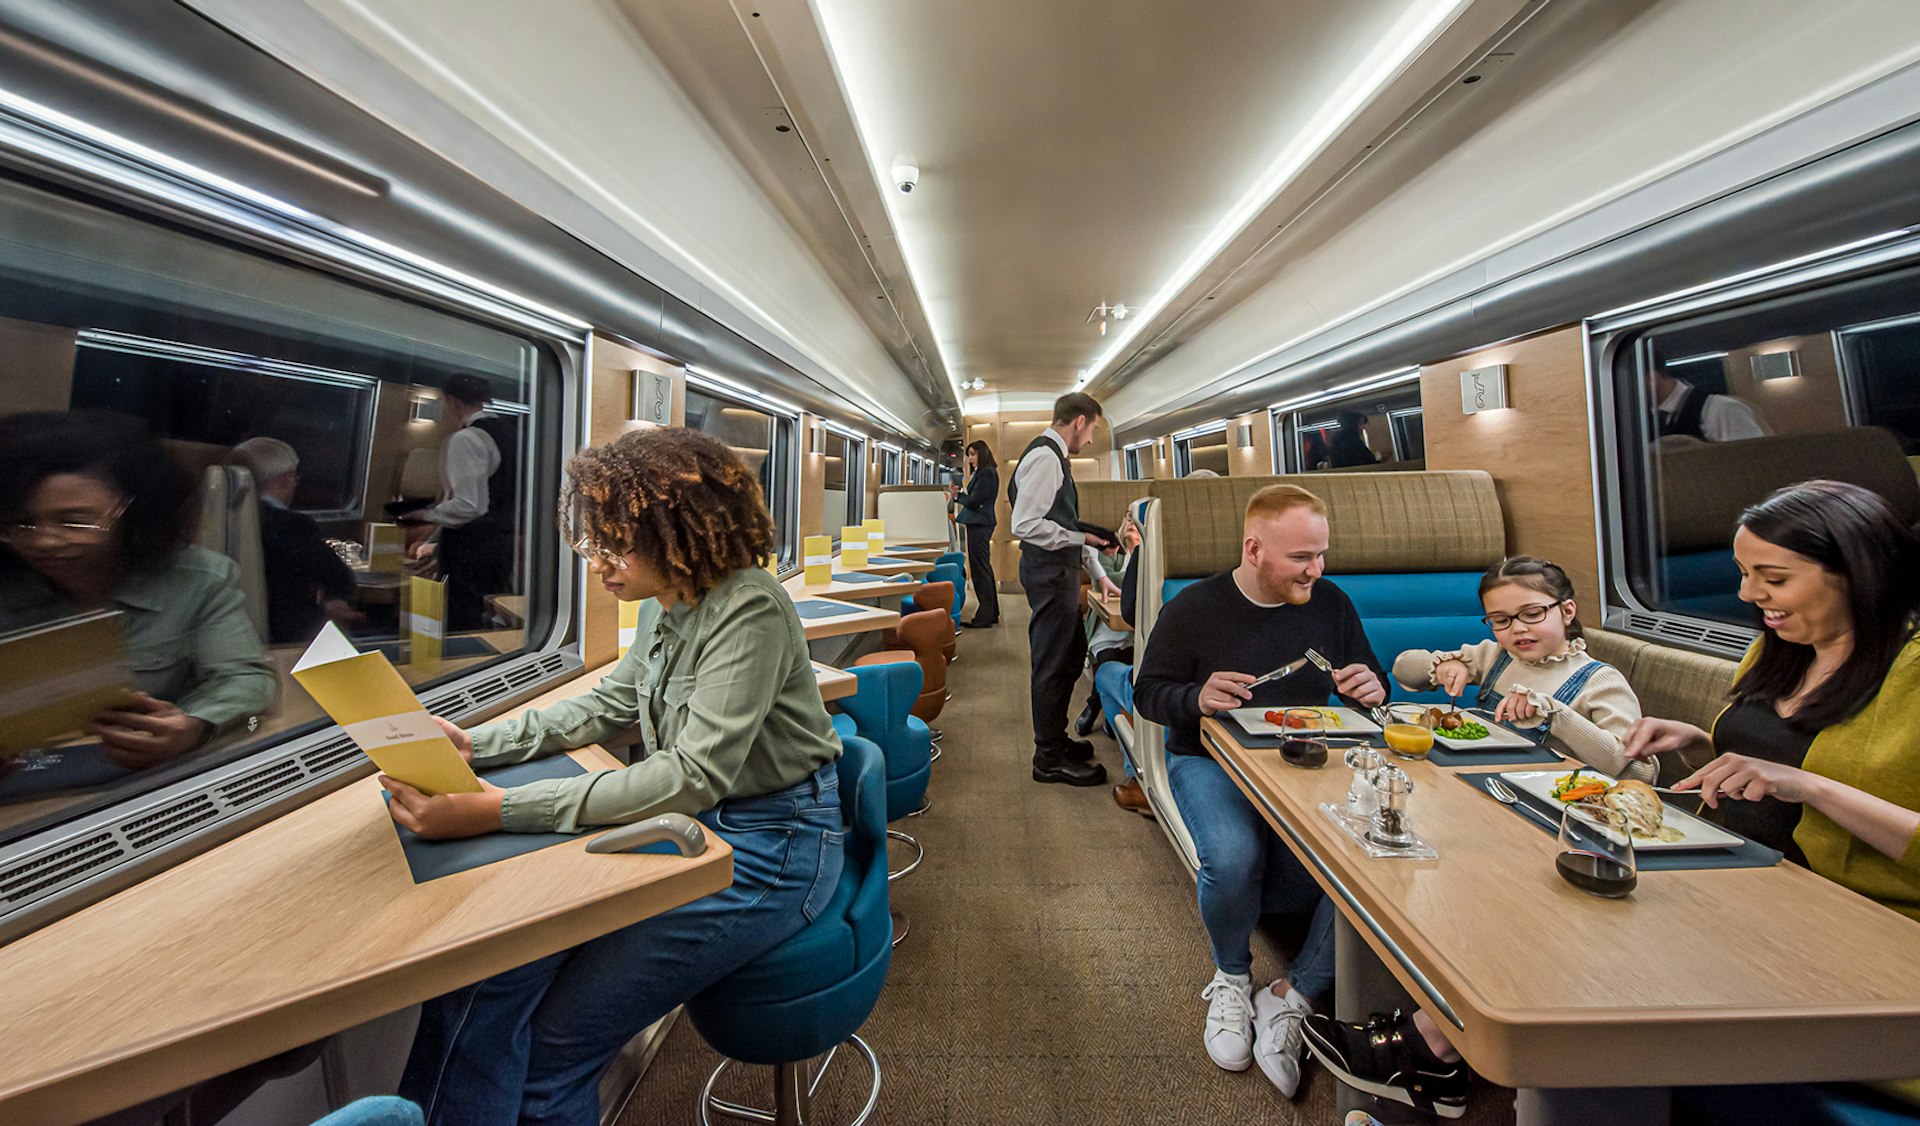 Passengers eat at tables in the Club Car aboard the Caledonian Sleeper overnight train between London and Scotland